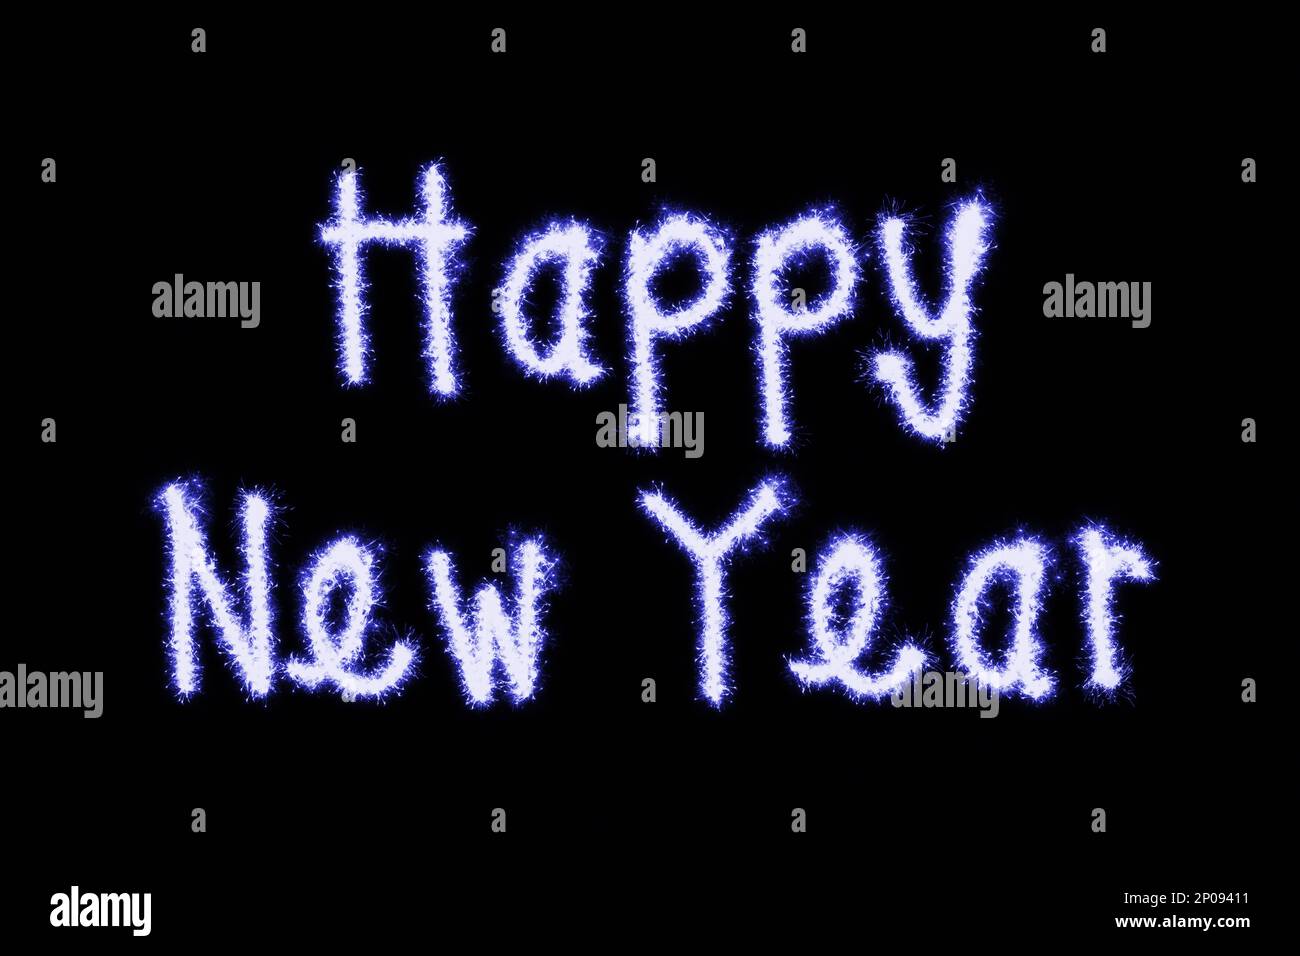 Close-up on a the short phrase 'Happy New Year' made of blue sparks on a black background. Stock Photo